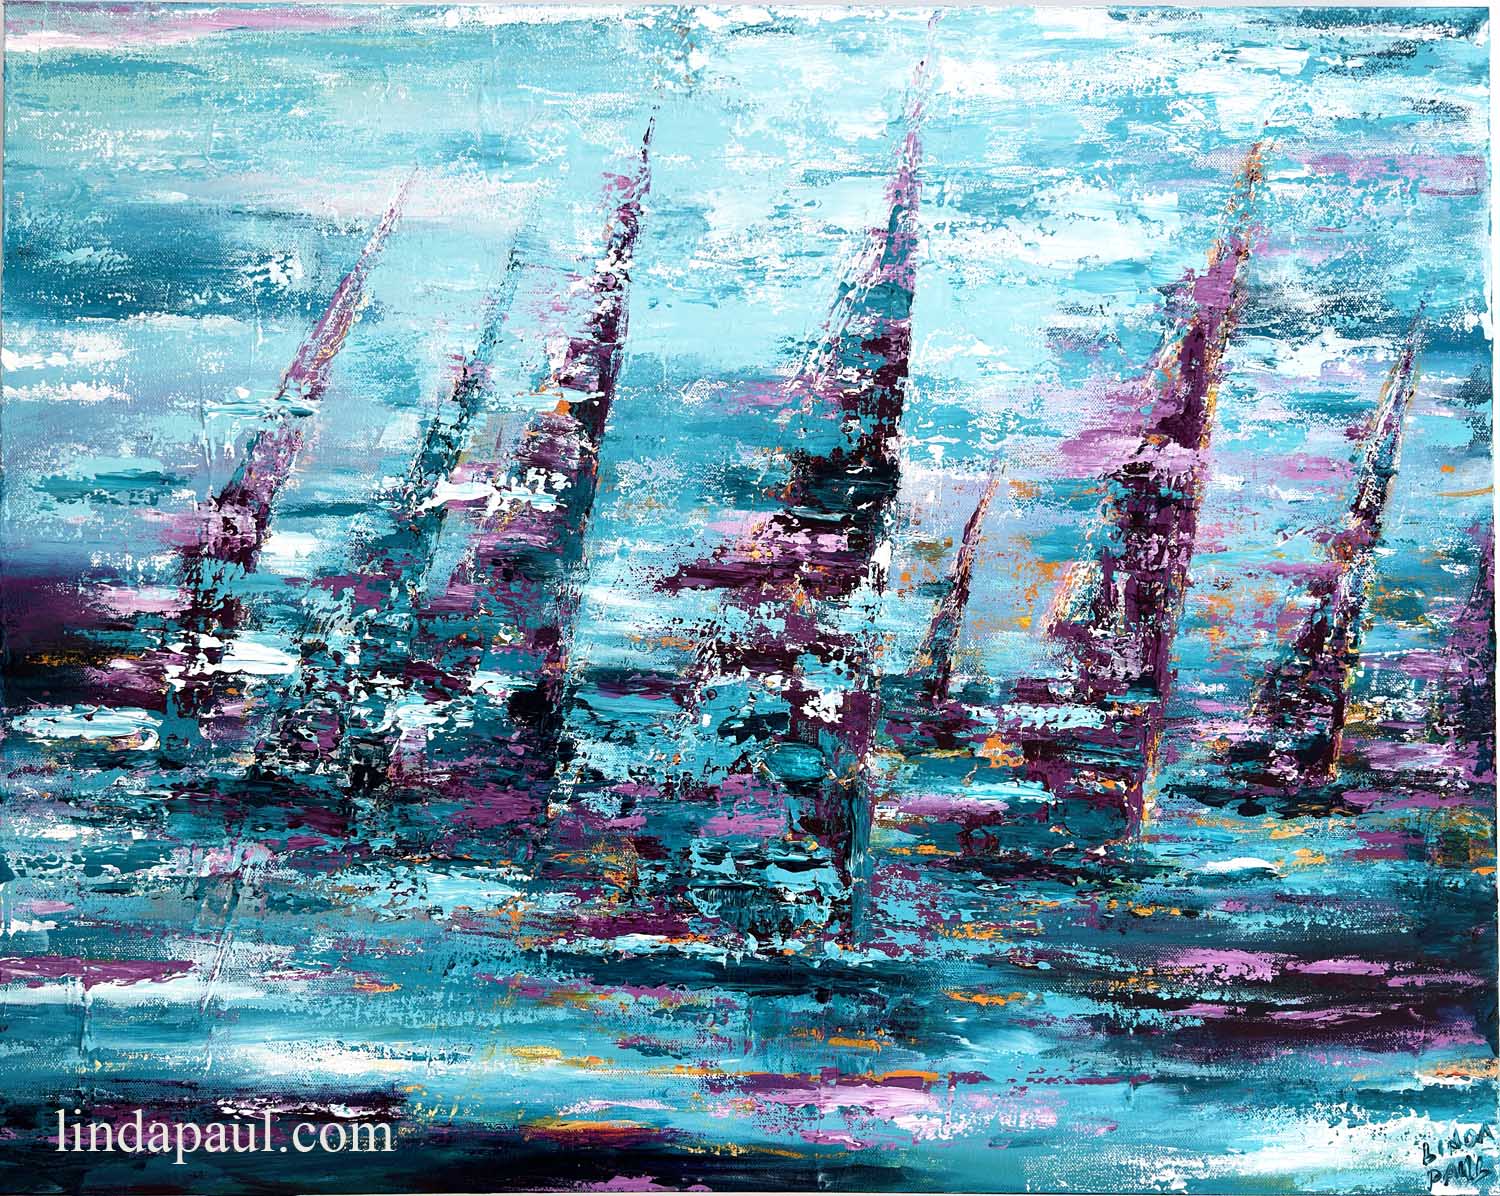 Sailboats Paintings for sale - Original Abstract Painting of Sailboats